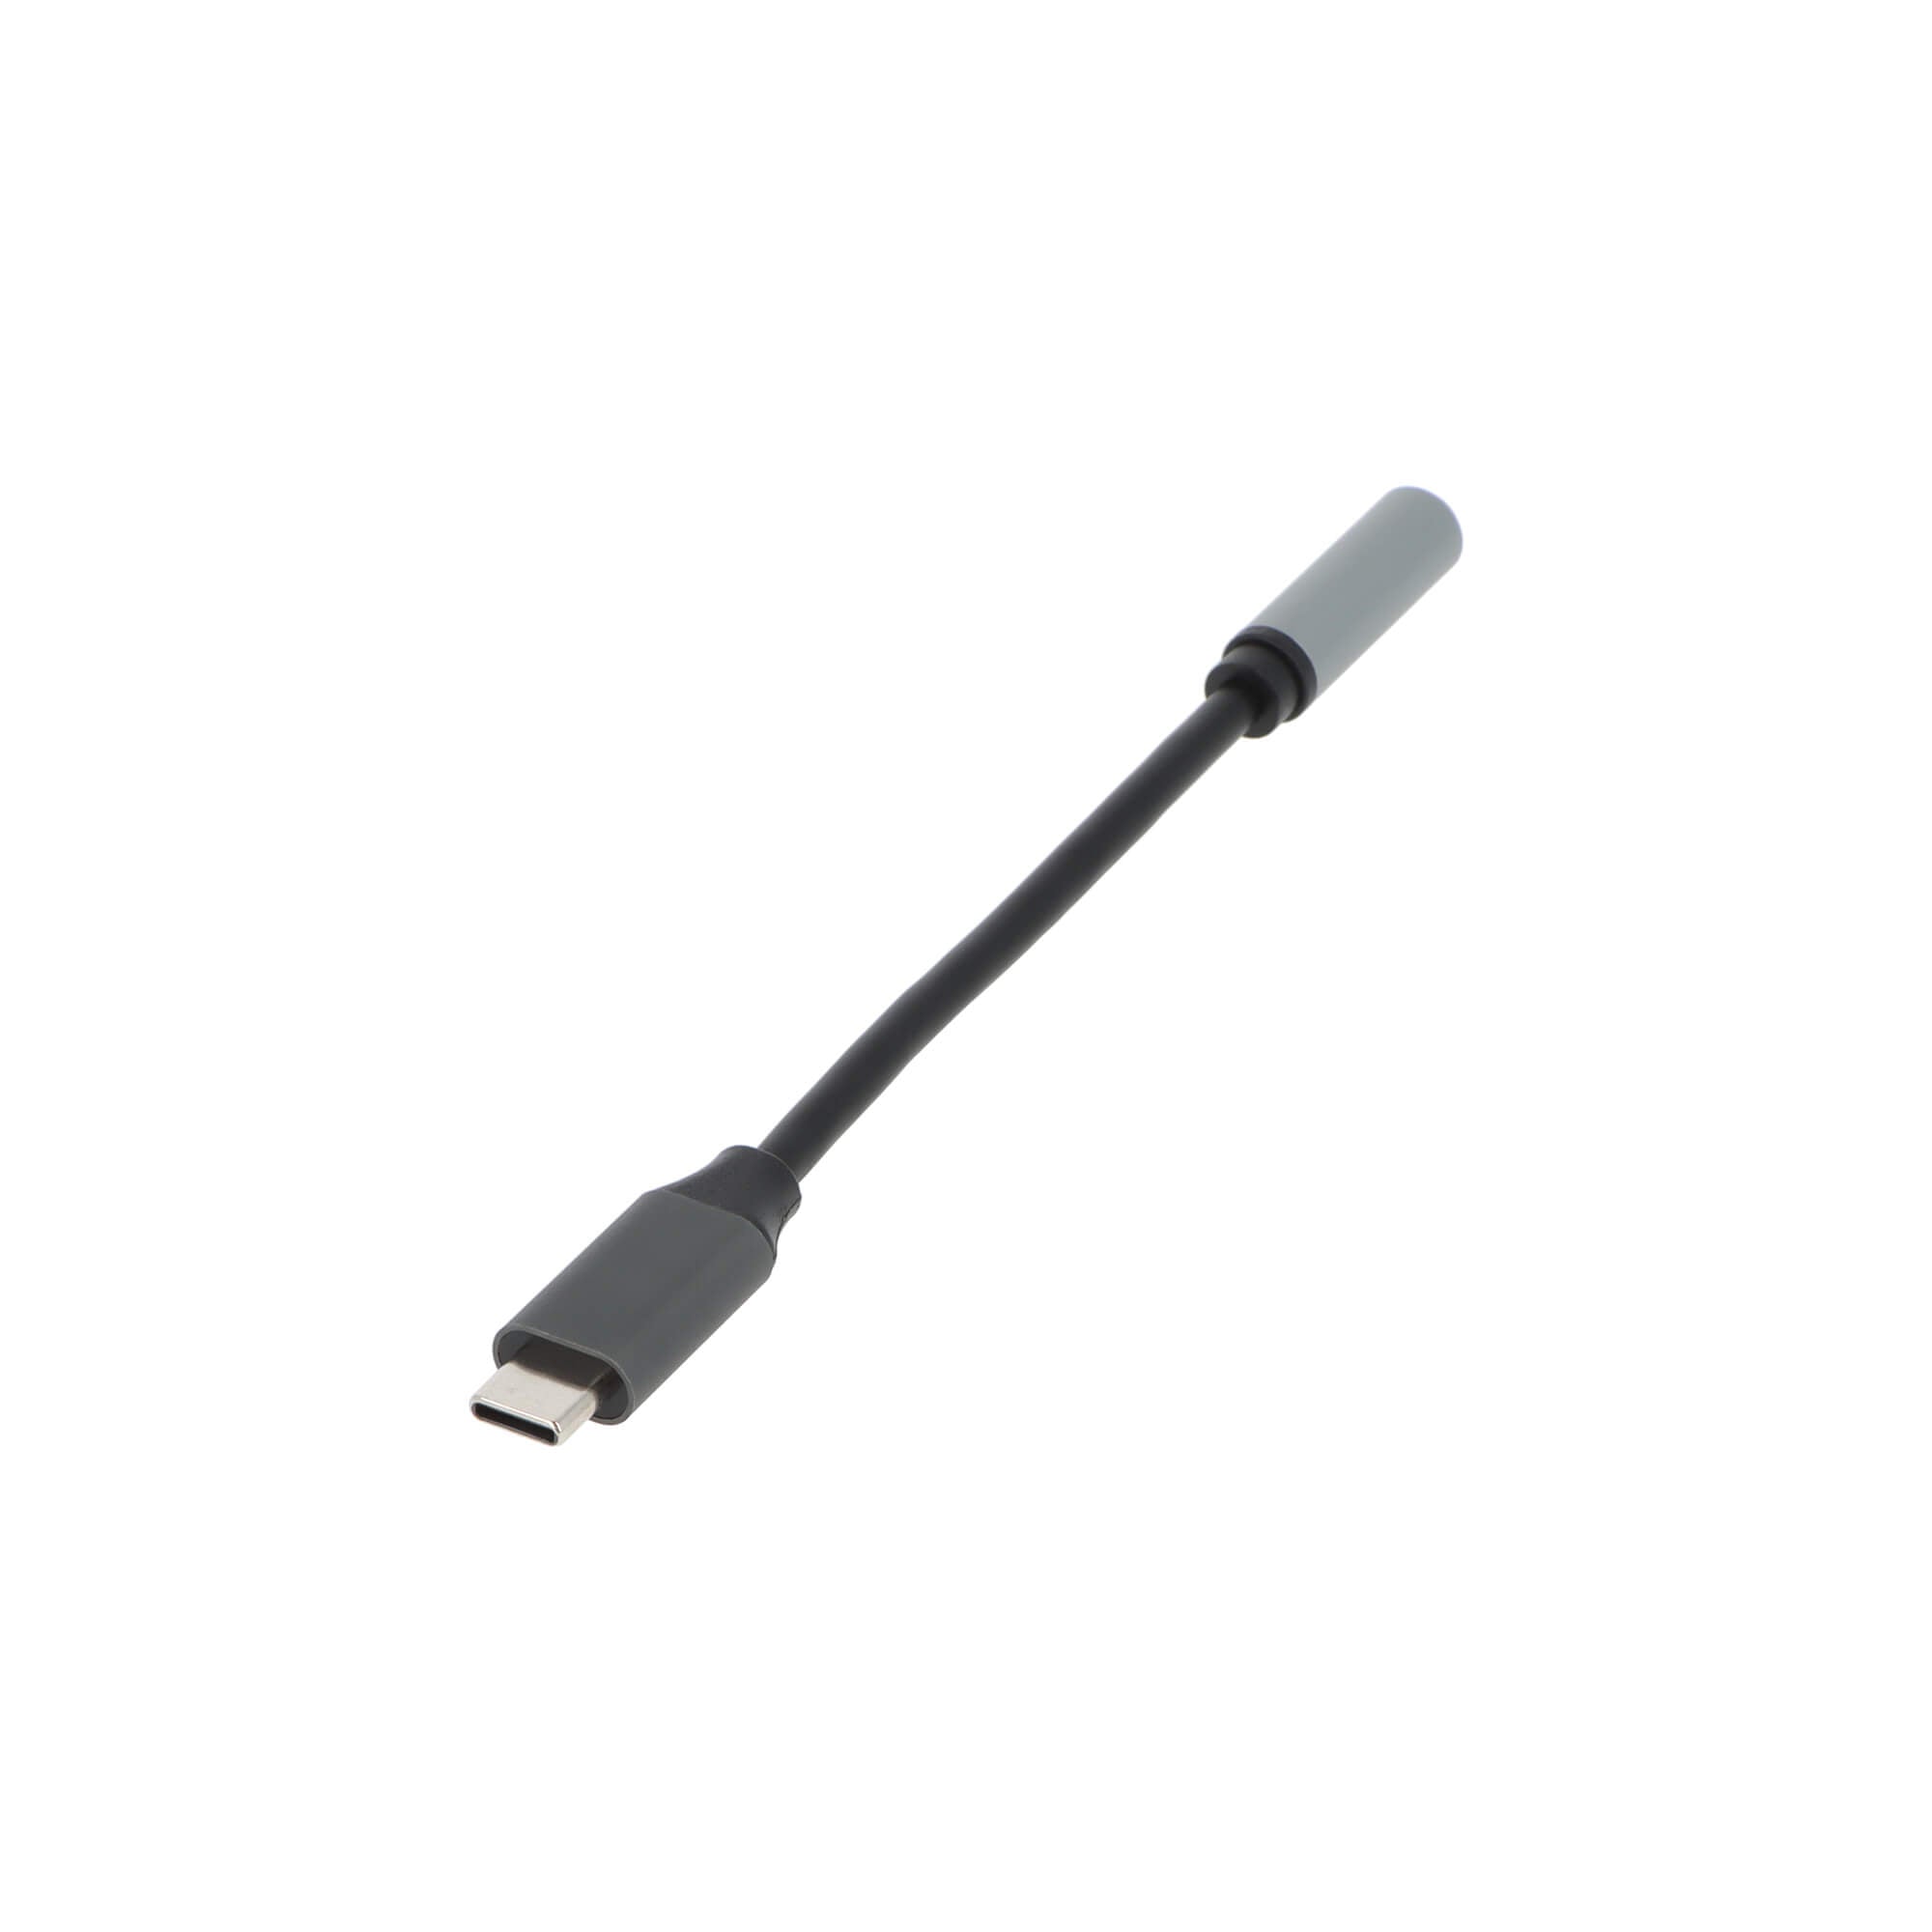 Type C to 3.5mm AUX